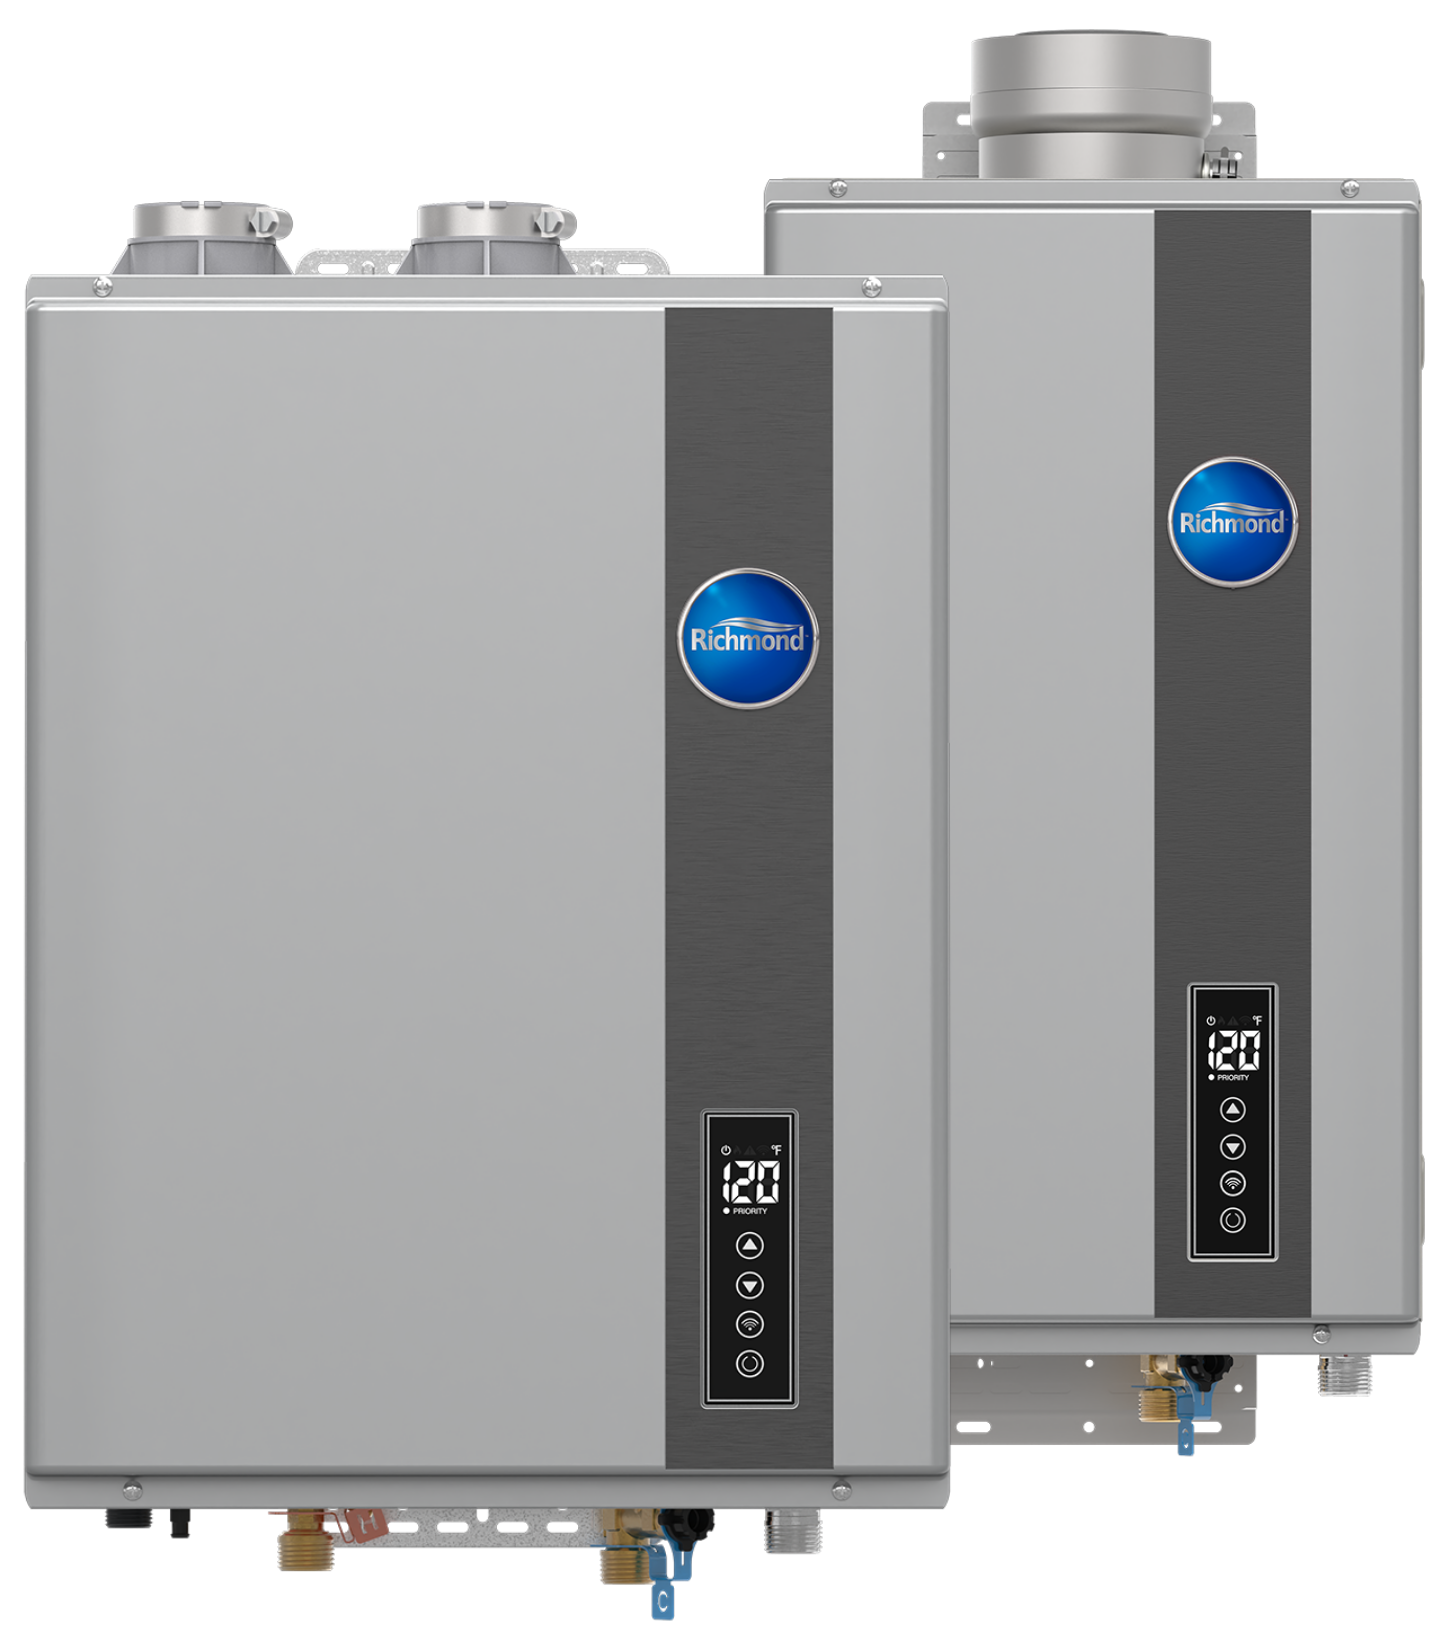 Gas & Electric Water Heaters & Tankless Models